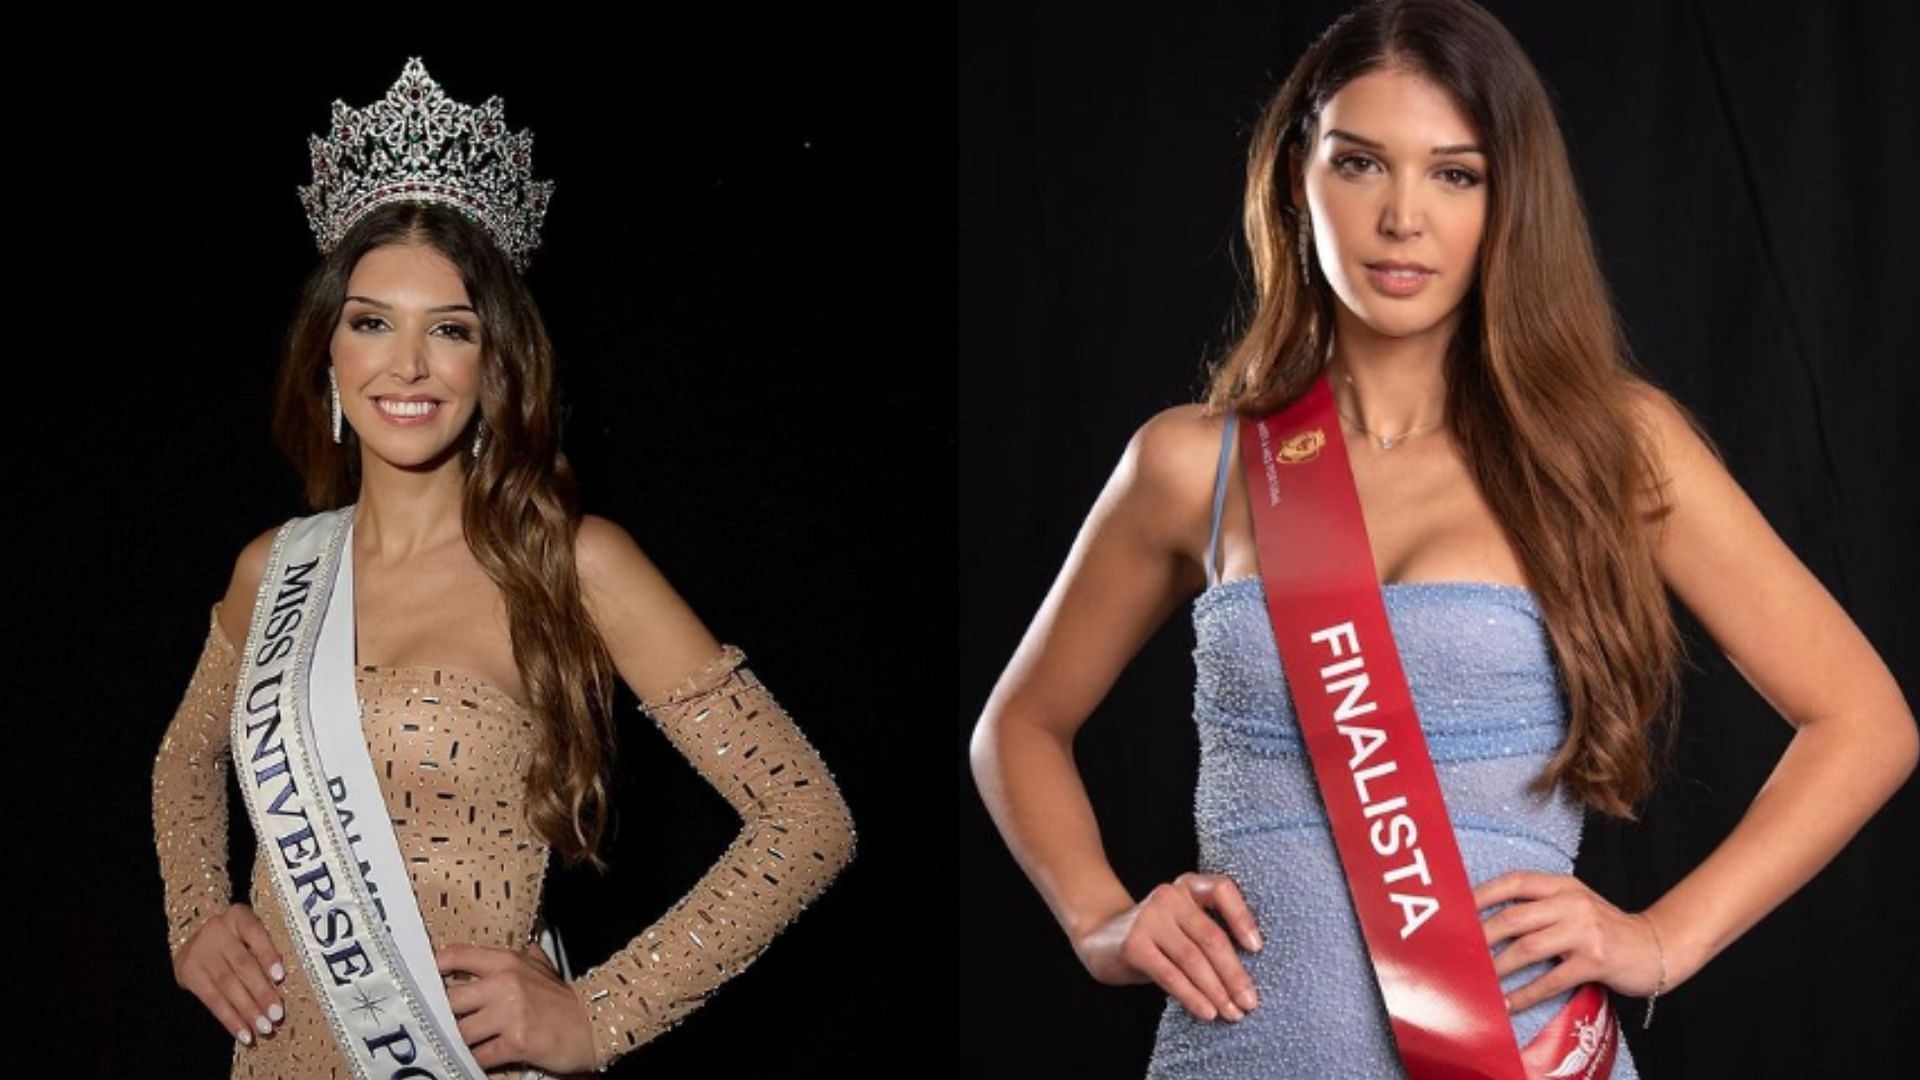 Marina Machete became the first trans woman to win the Miss Portugal pageant. (Image via Instagram/marinamachetereis)